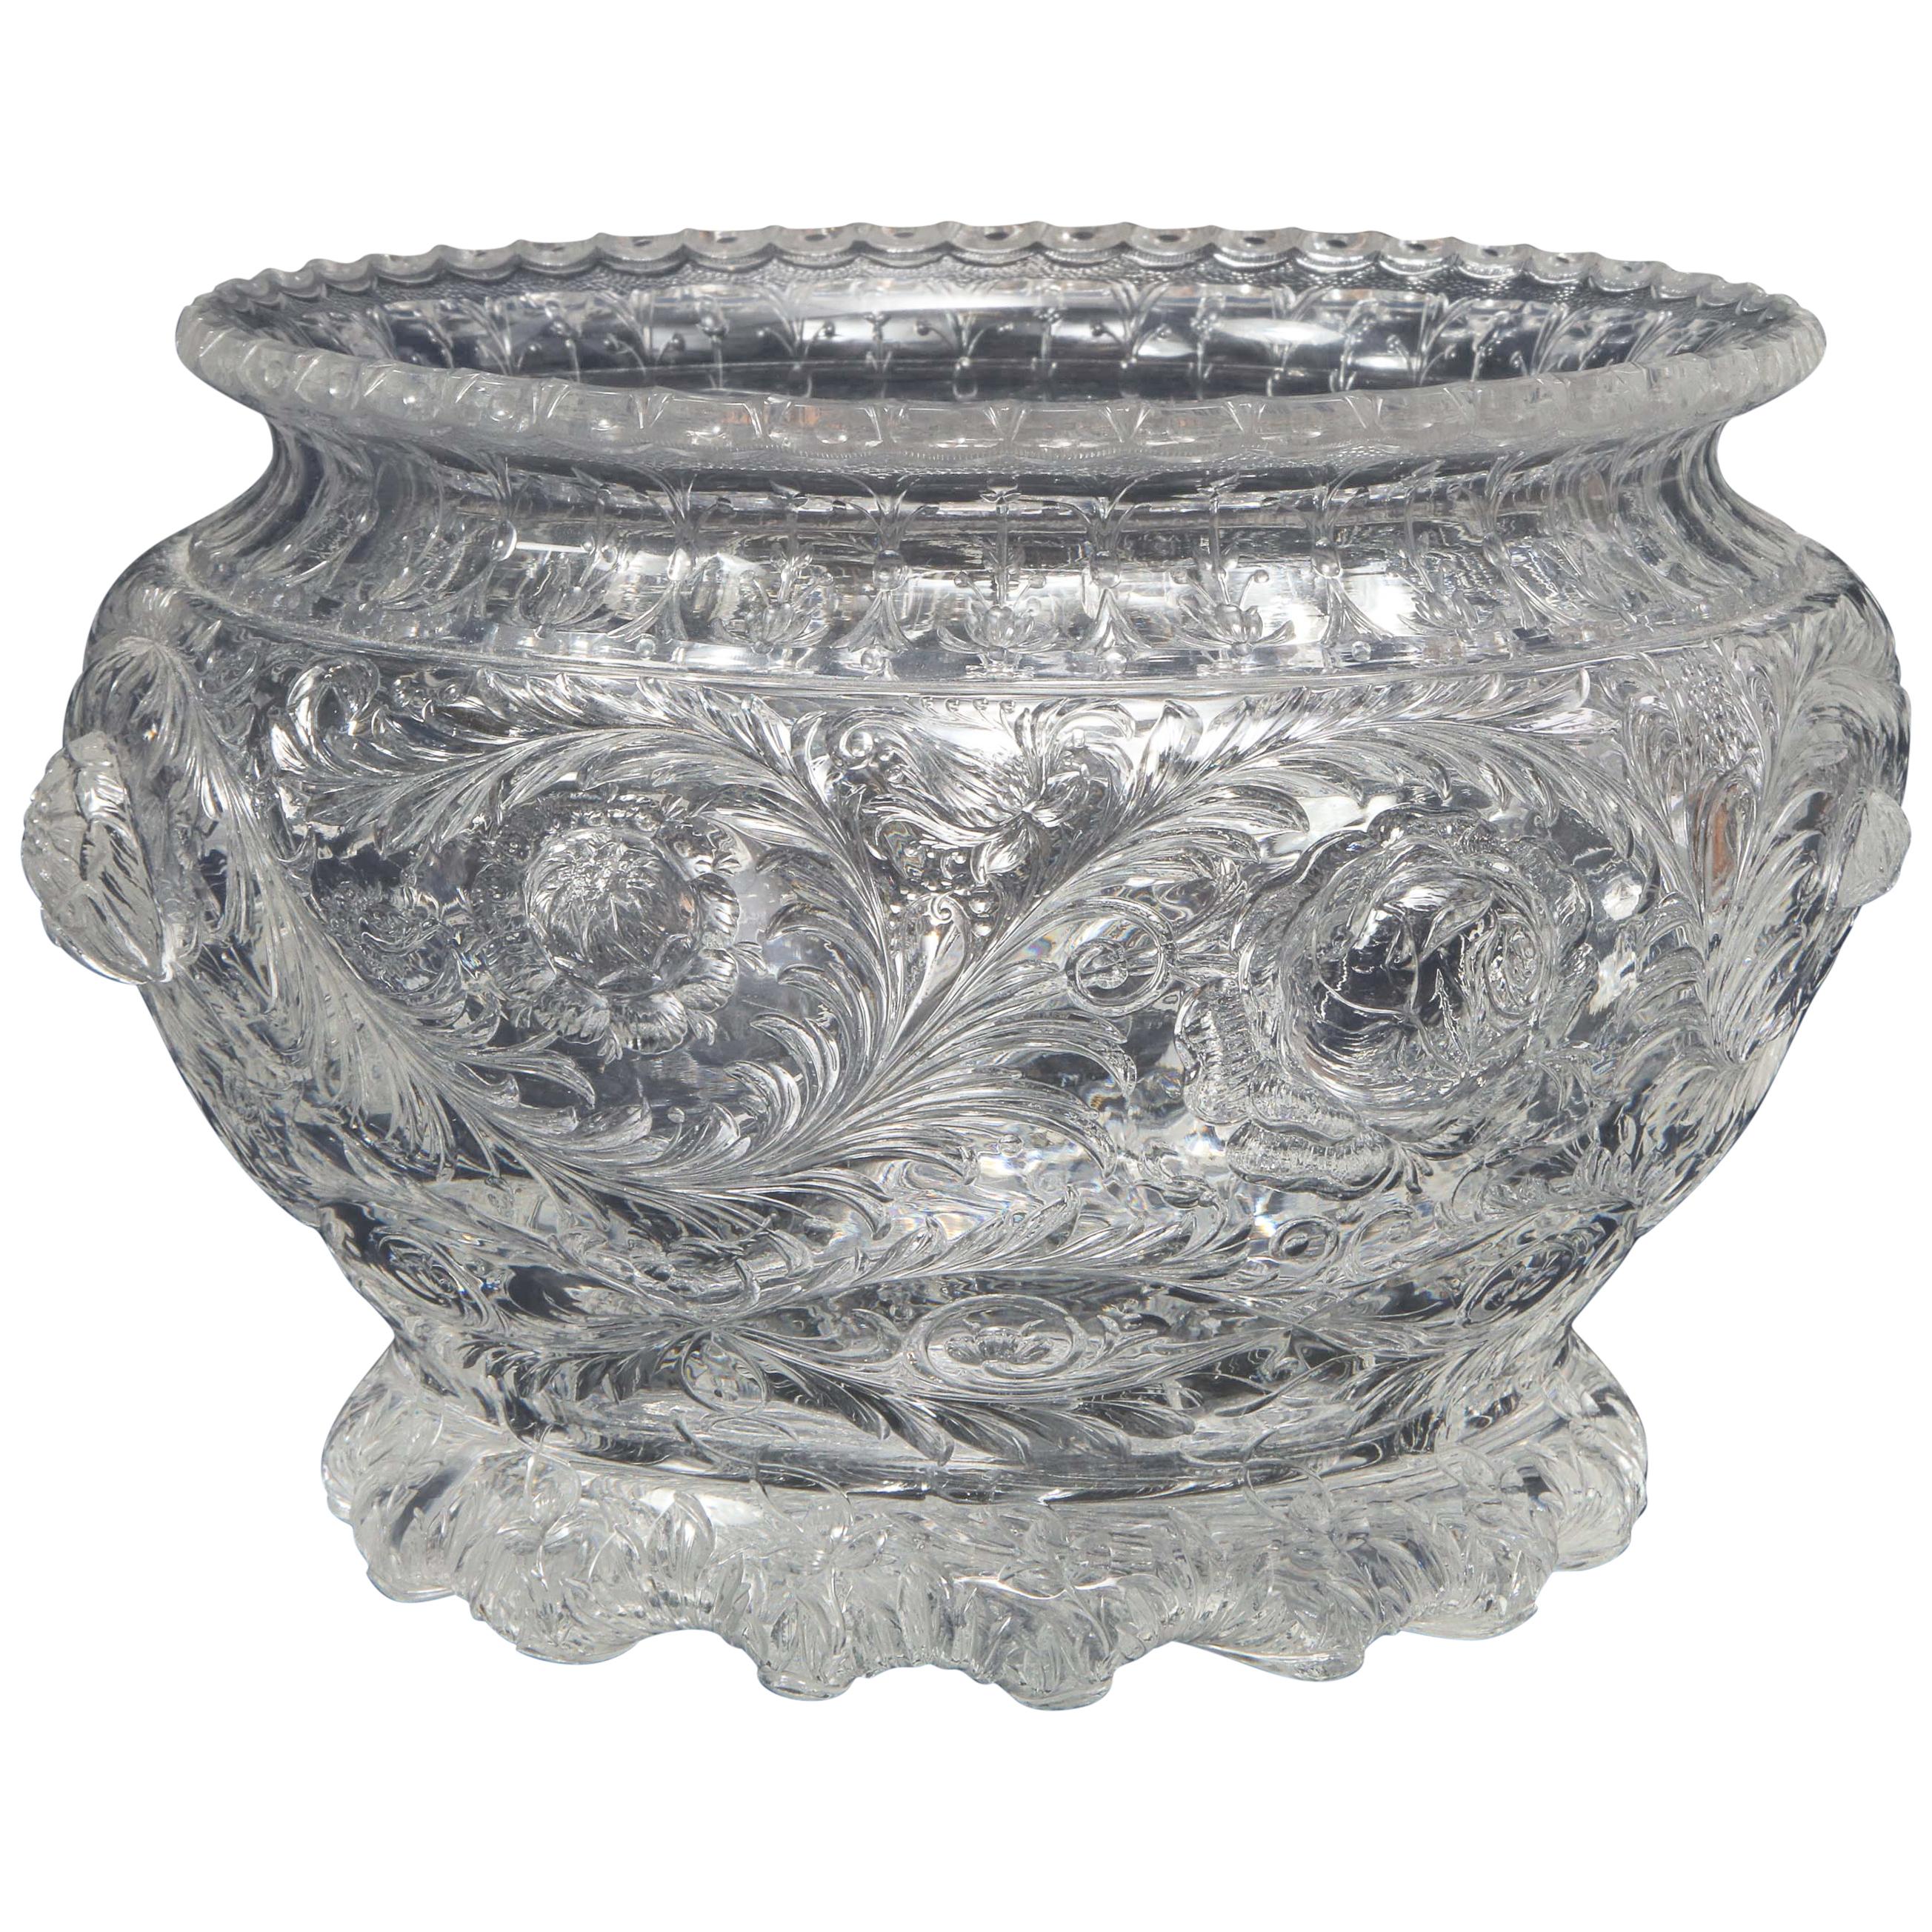 Thomas Webb & Sons Wheel Carved 'Rock-Crystal’ Type Punch Bowl, George Woodall For Sale